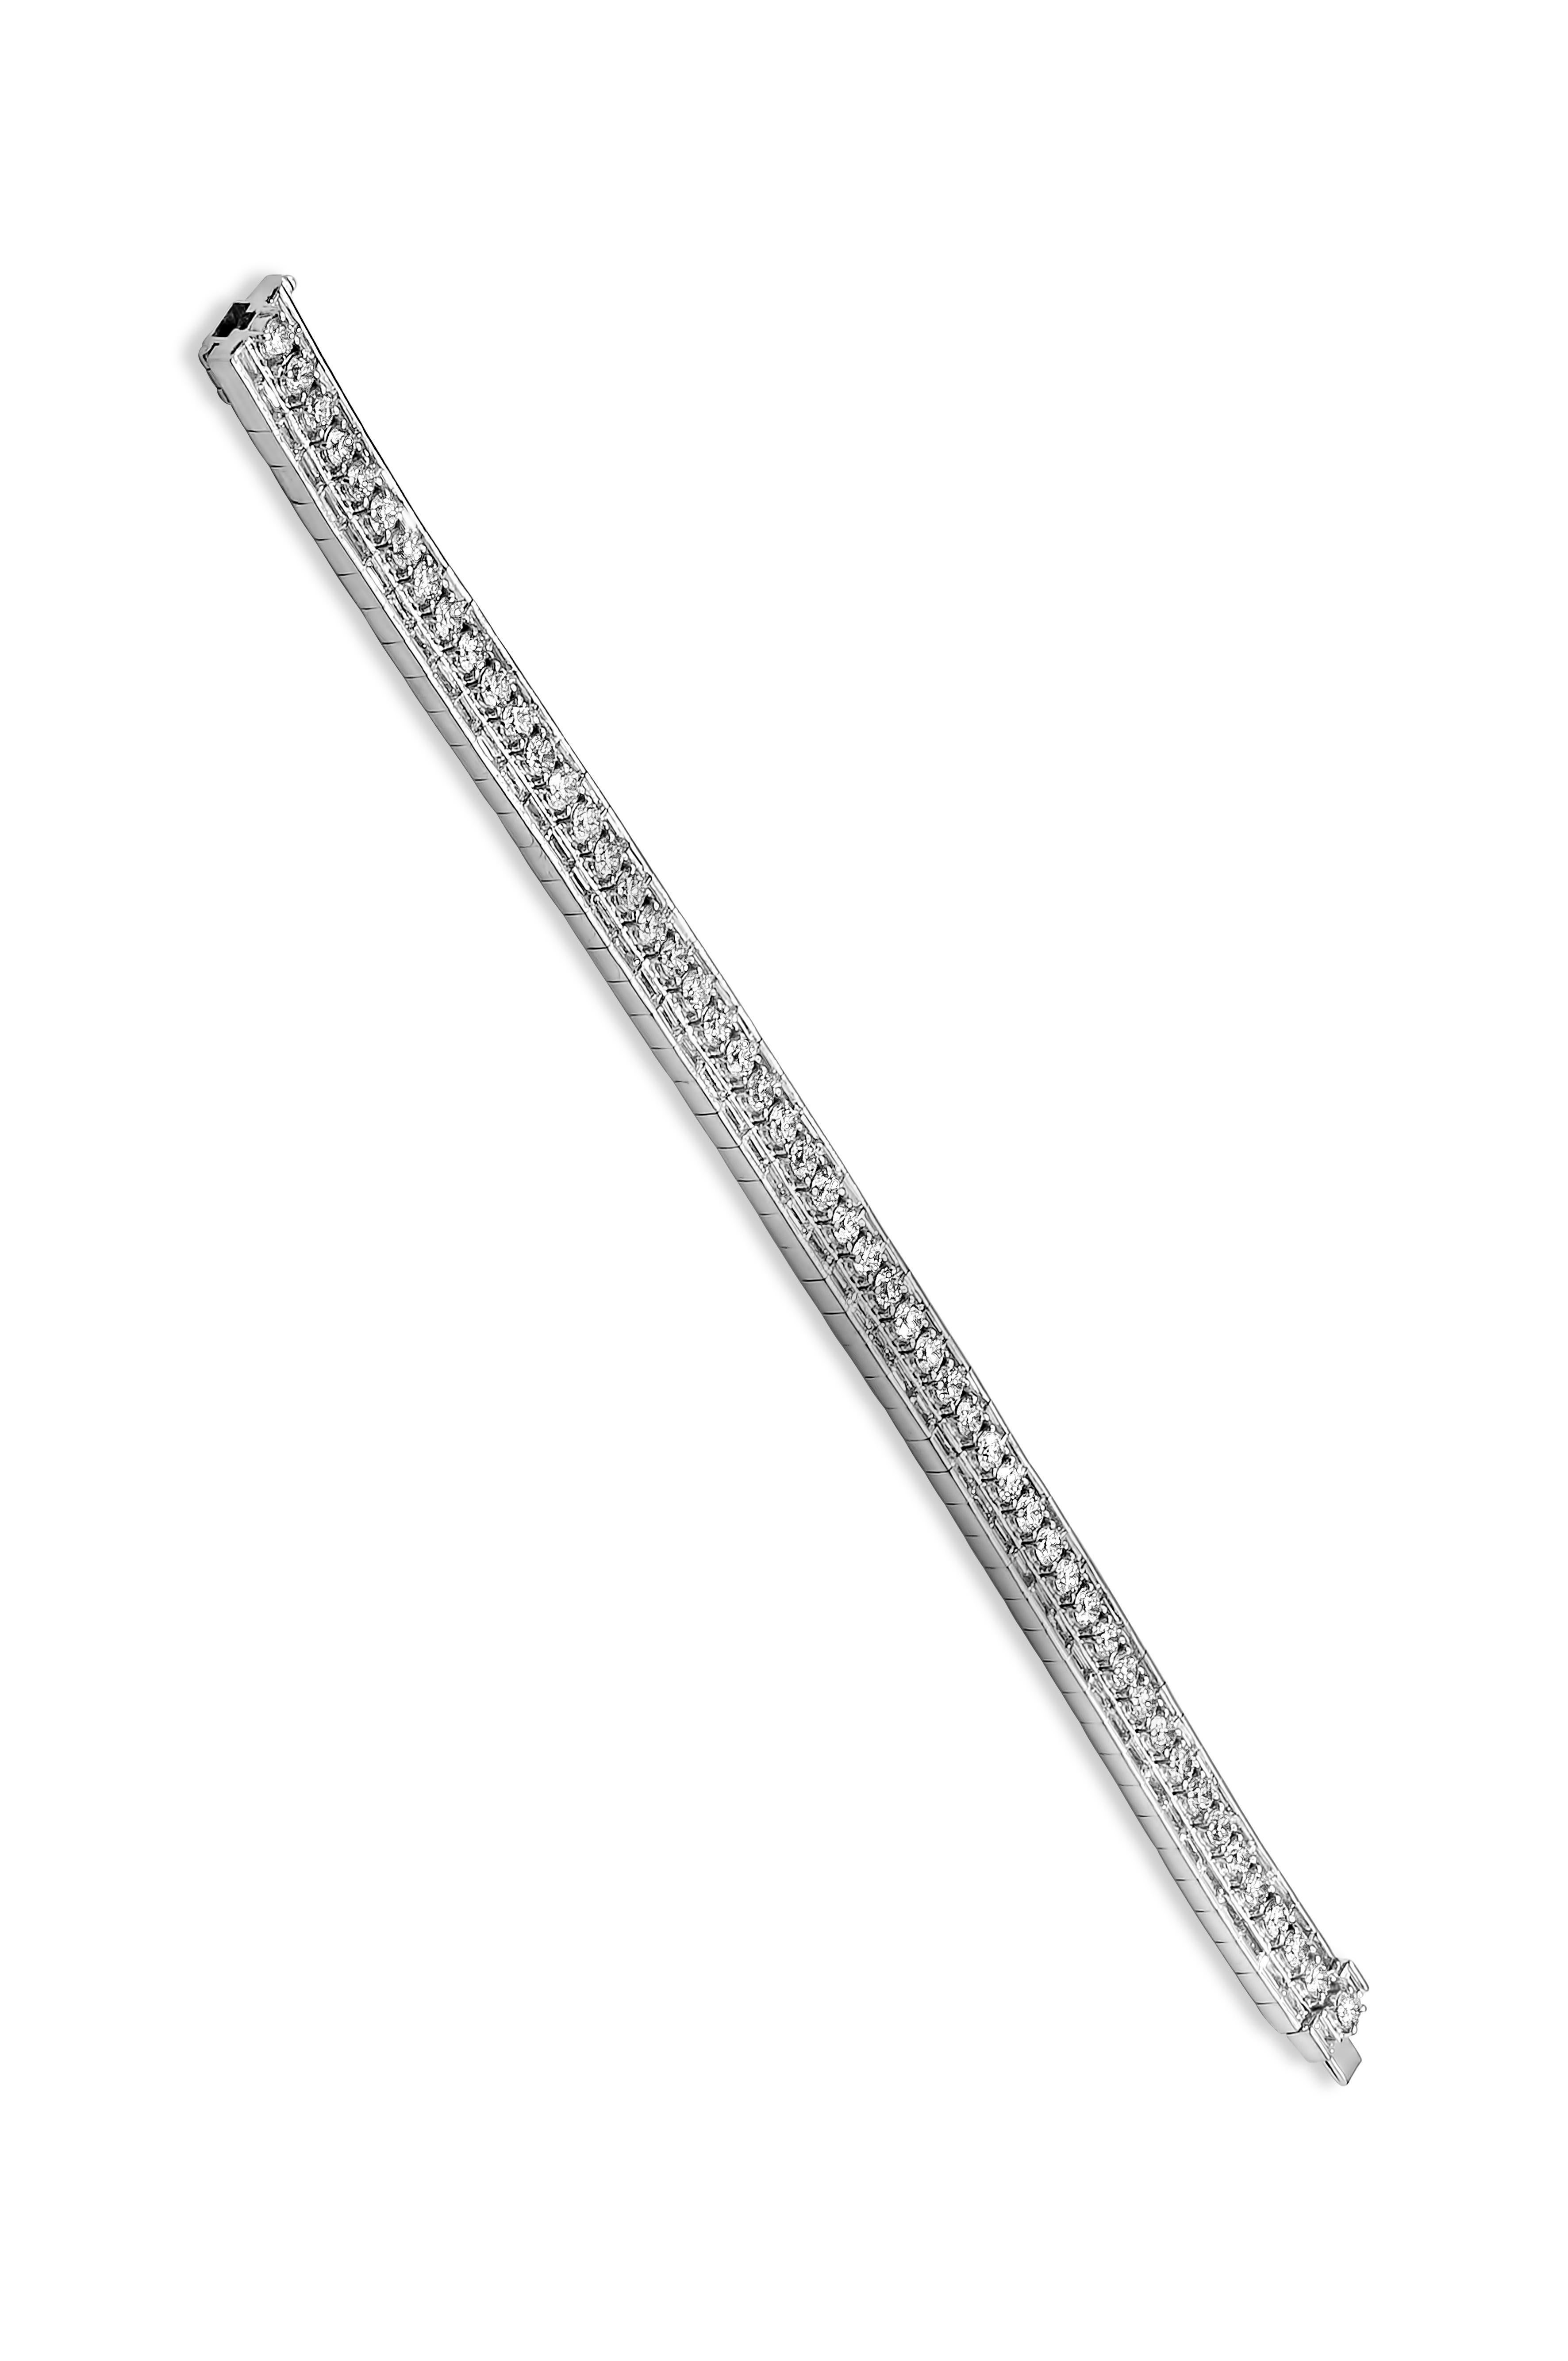 A fashionable tennis bracelet showcasing a row of round brilliant diamonds, set in-between baguette diamonds, weighing 11.14 carats total. Made in 18K White Gold and 7 inches in Length.

Roman Malakov is a custom house, specializing in creating